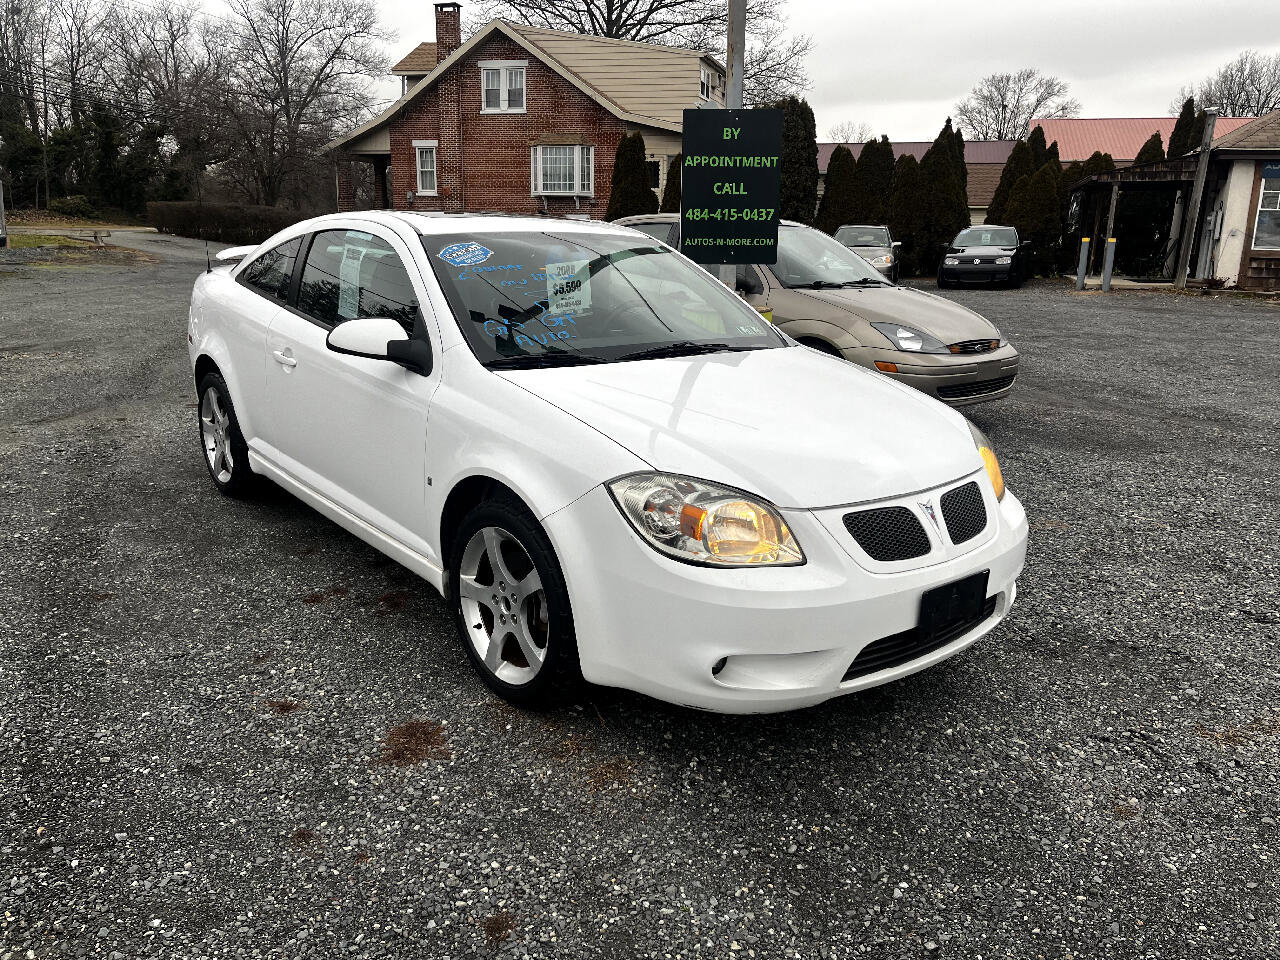 Used 2008 Pontiac G5 for Sale (Test Drive at Home) - Kelley Blue Book